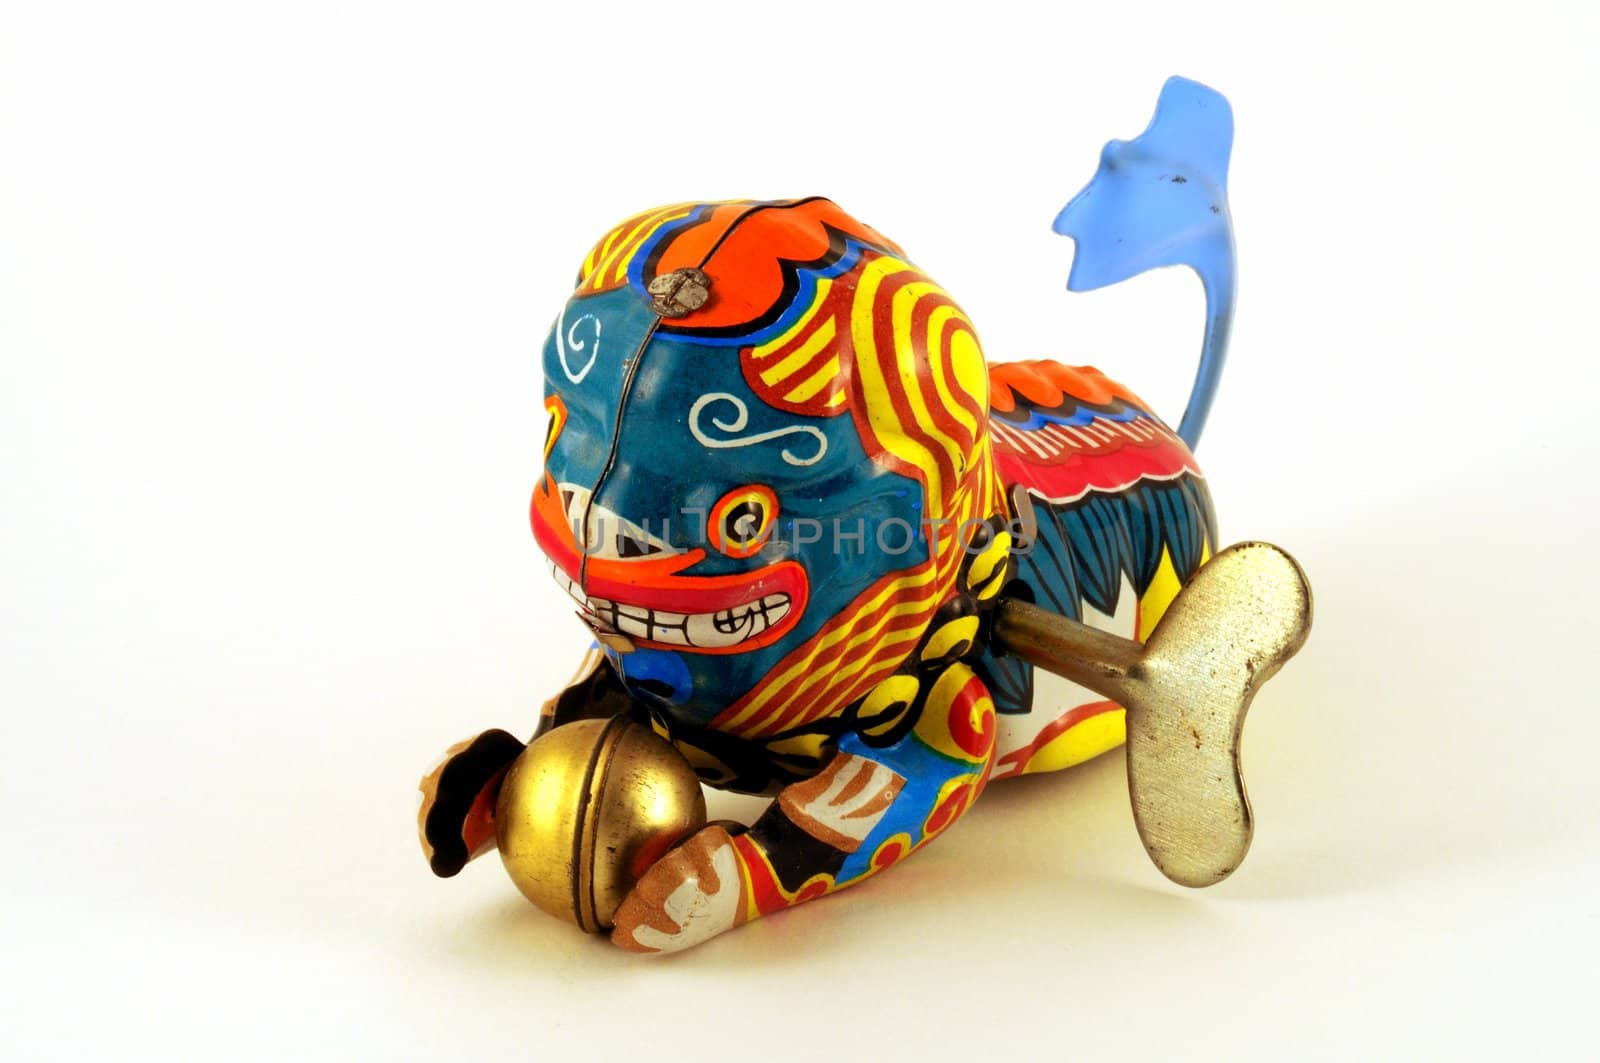 Wind-up toy dragon from China with blue tail and a golden ball in its paws, made of brightly-painted metal.  The winding key is visible in its side.

